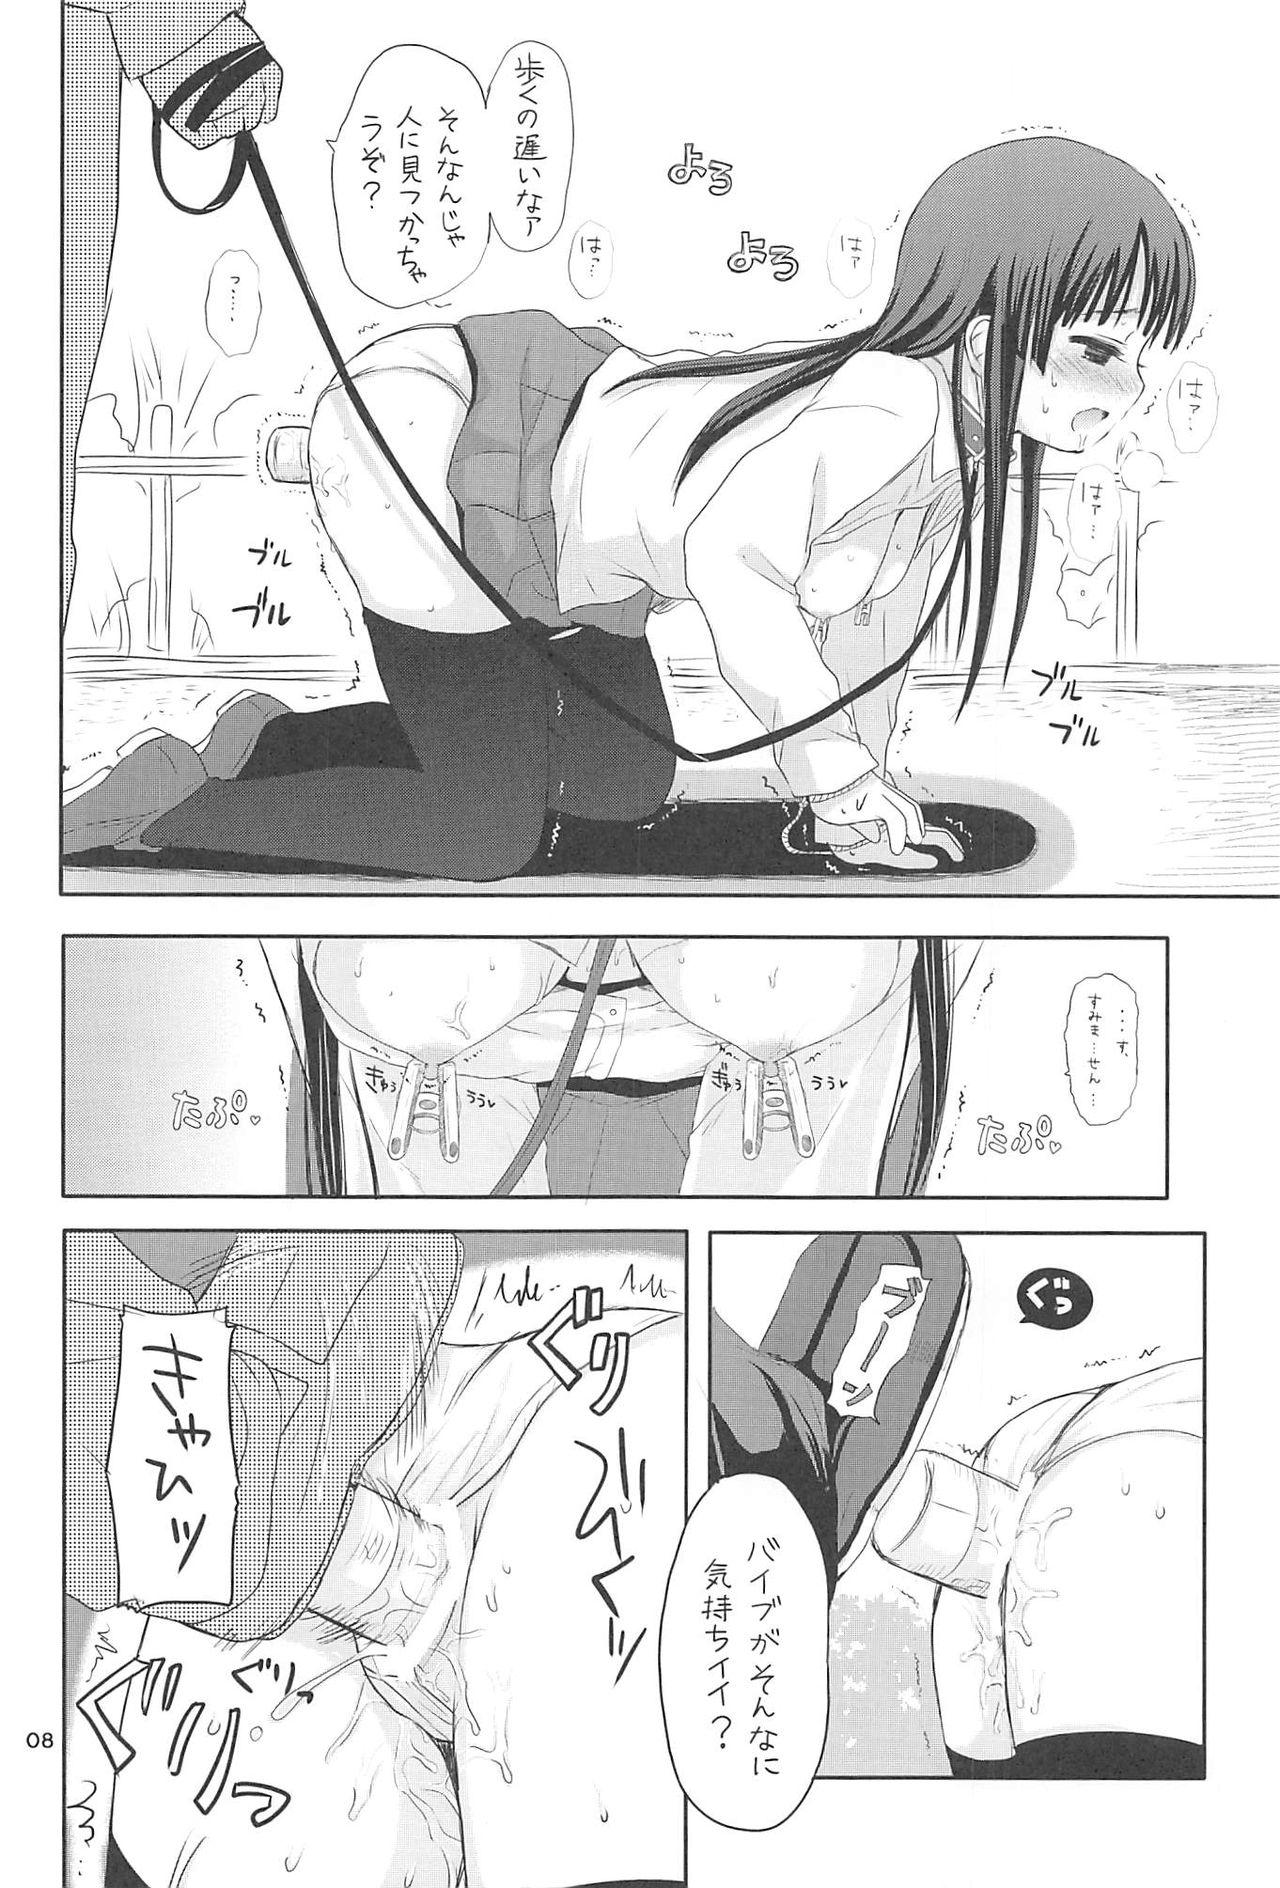 Best Blowjob Miobon!2 - K-on Pica - Page 7